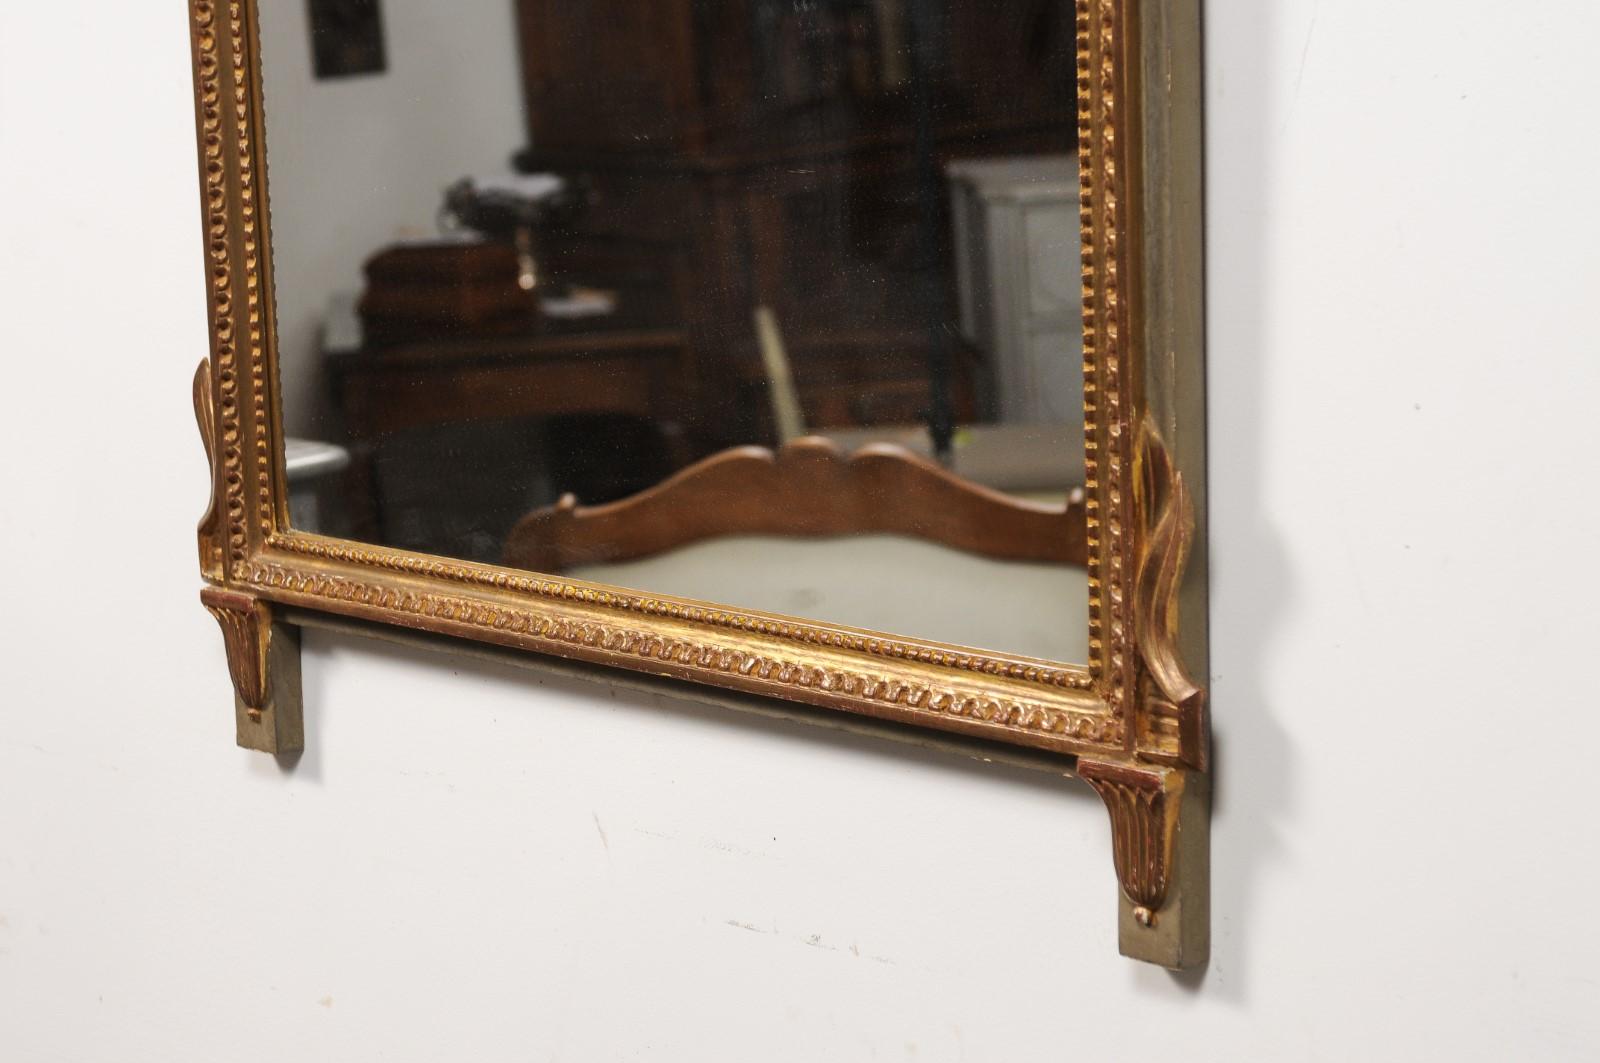 Louis XVI Style Gilt Wood Mirror with Floral Carved Medallion Crest and Tassels For Sale 9